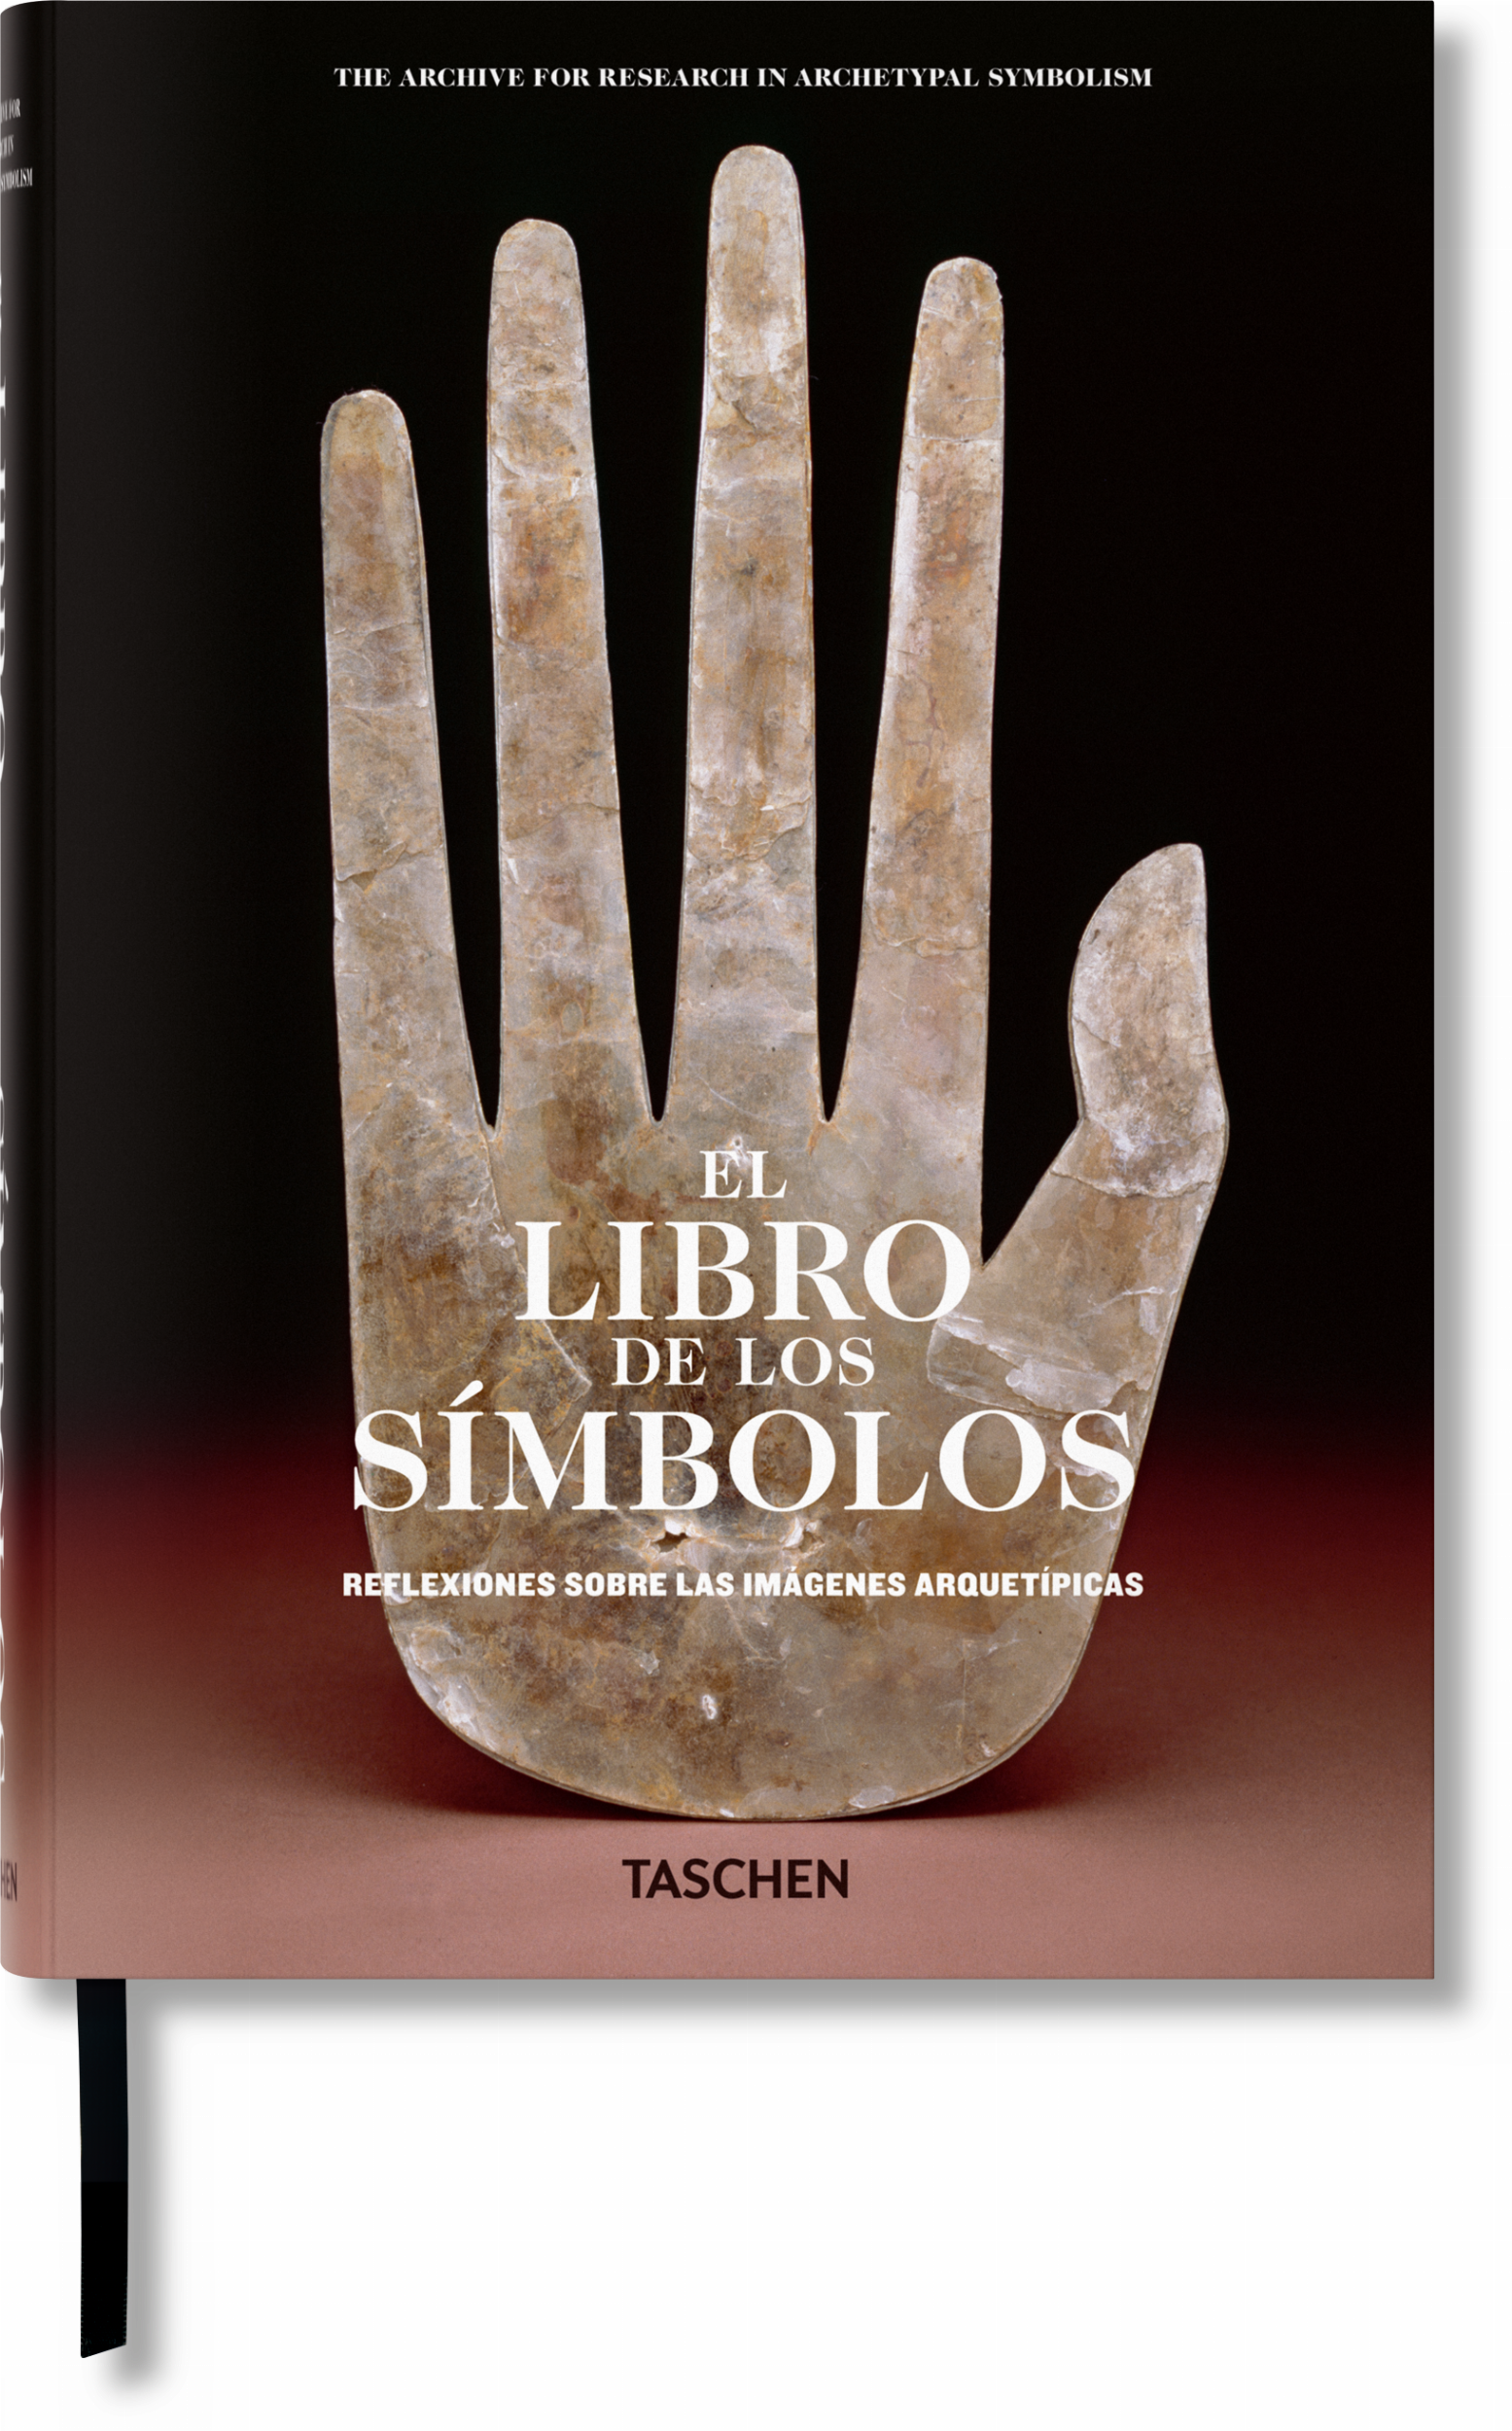 TASCHEN Books: Reflect on archetypal images: The Book of Symbols.